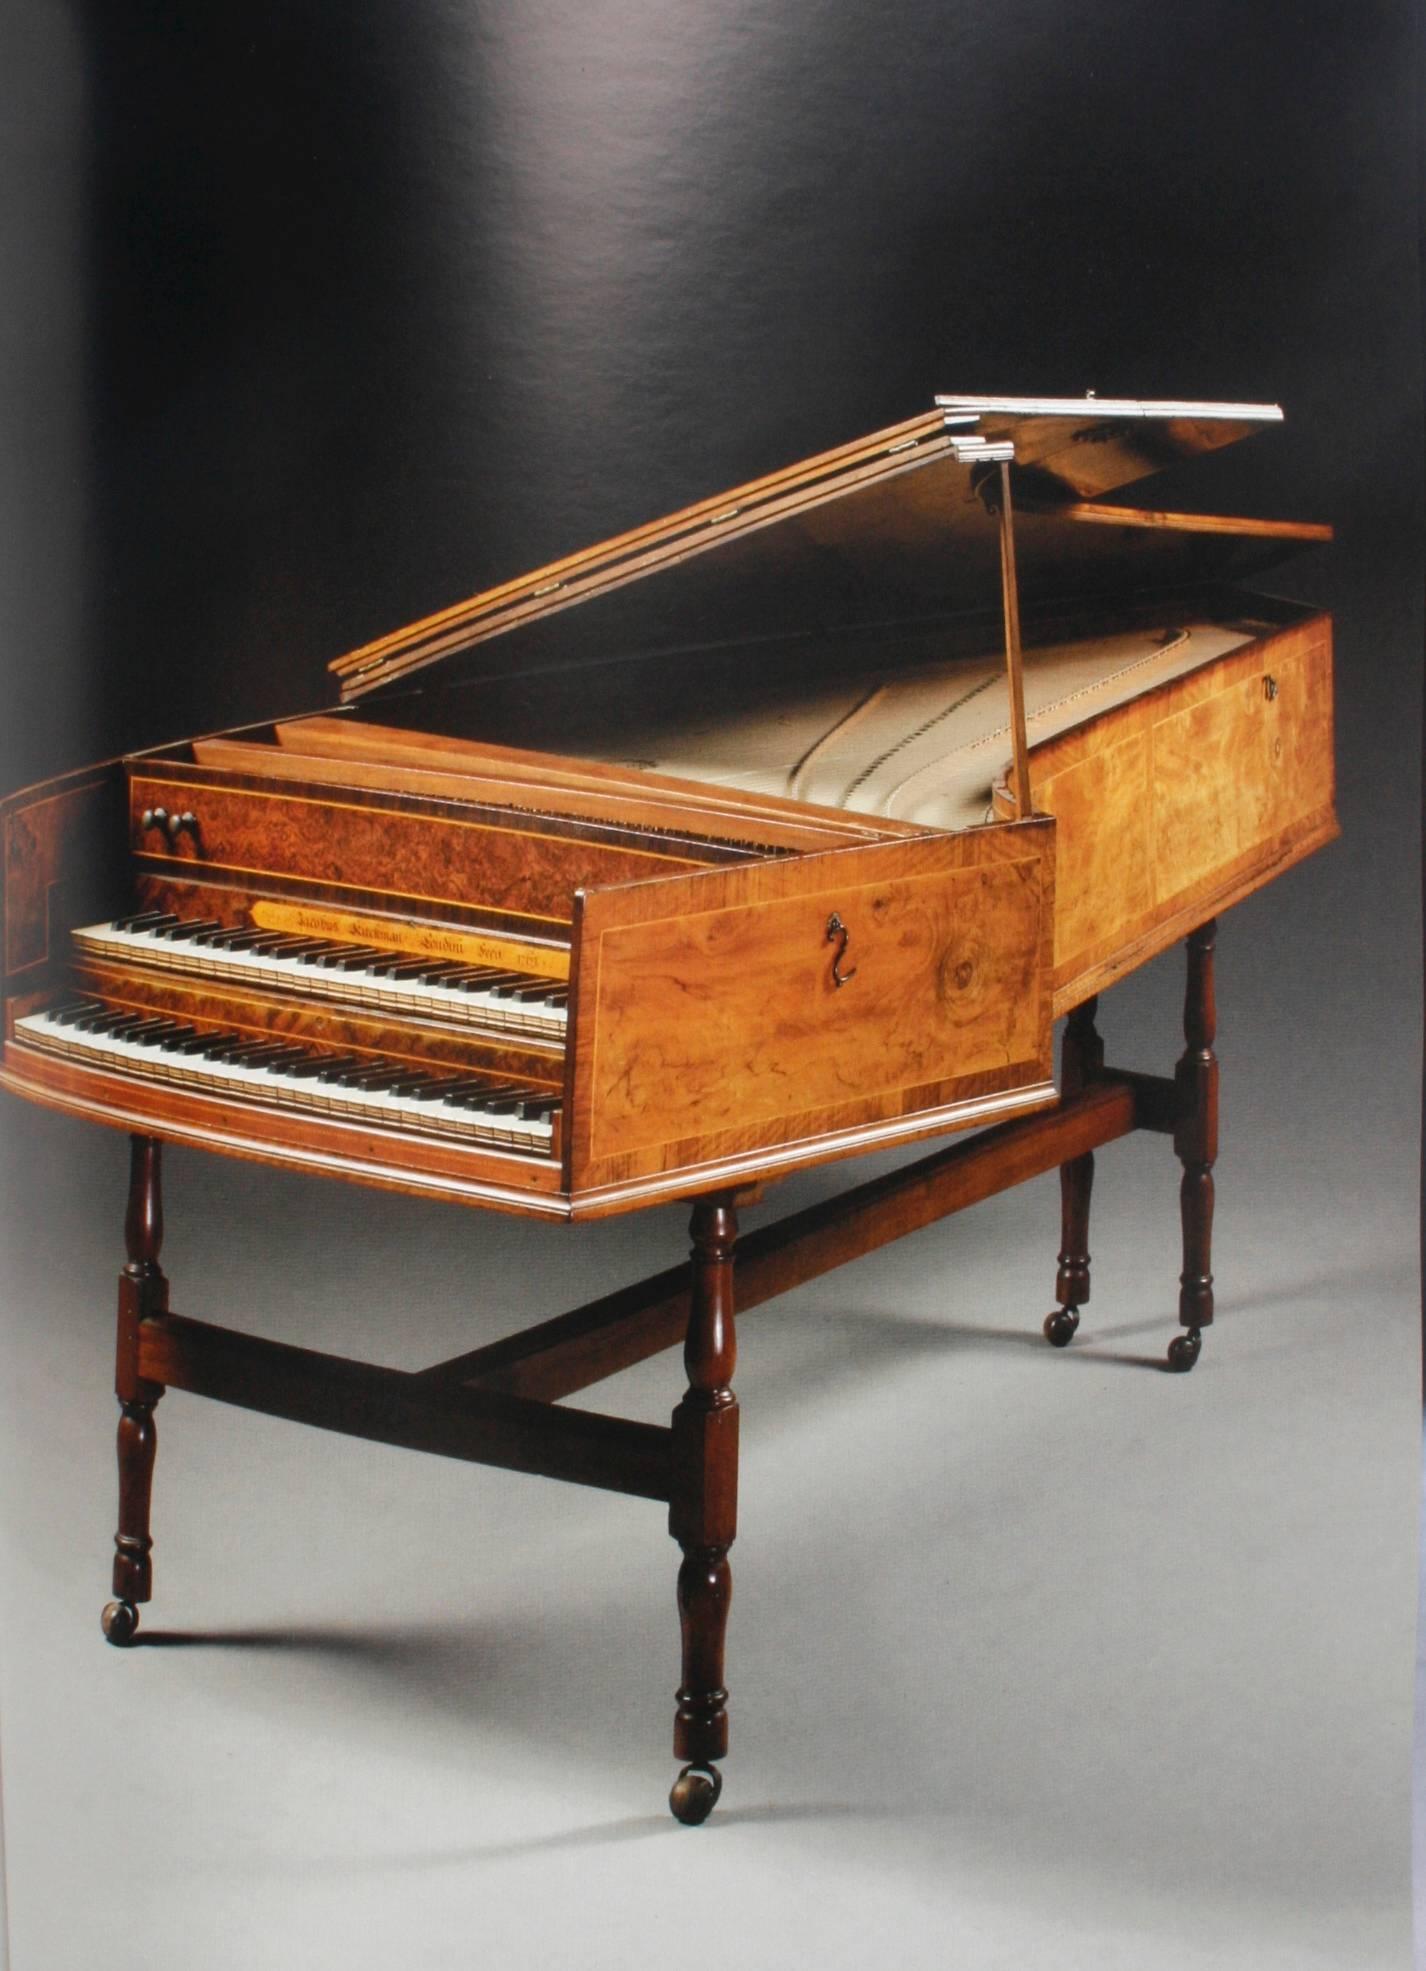 sotheby's musical instruments